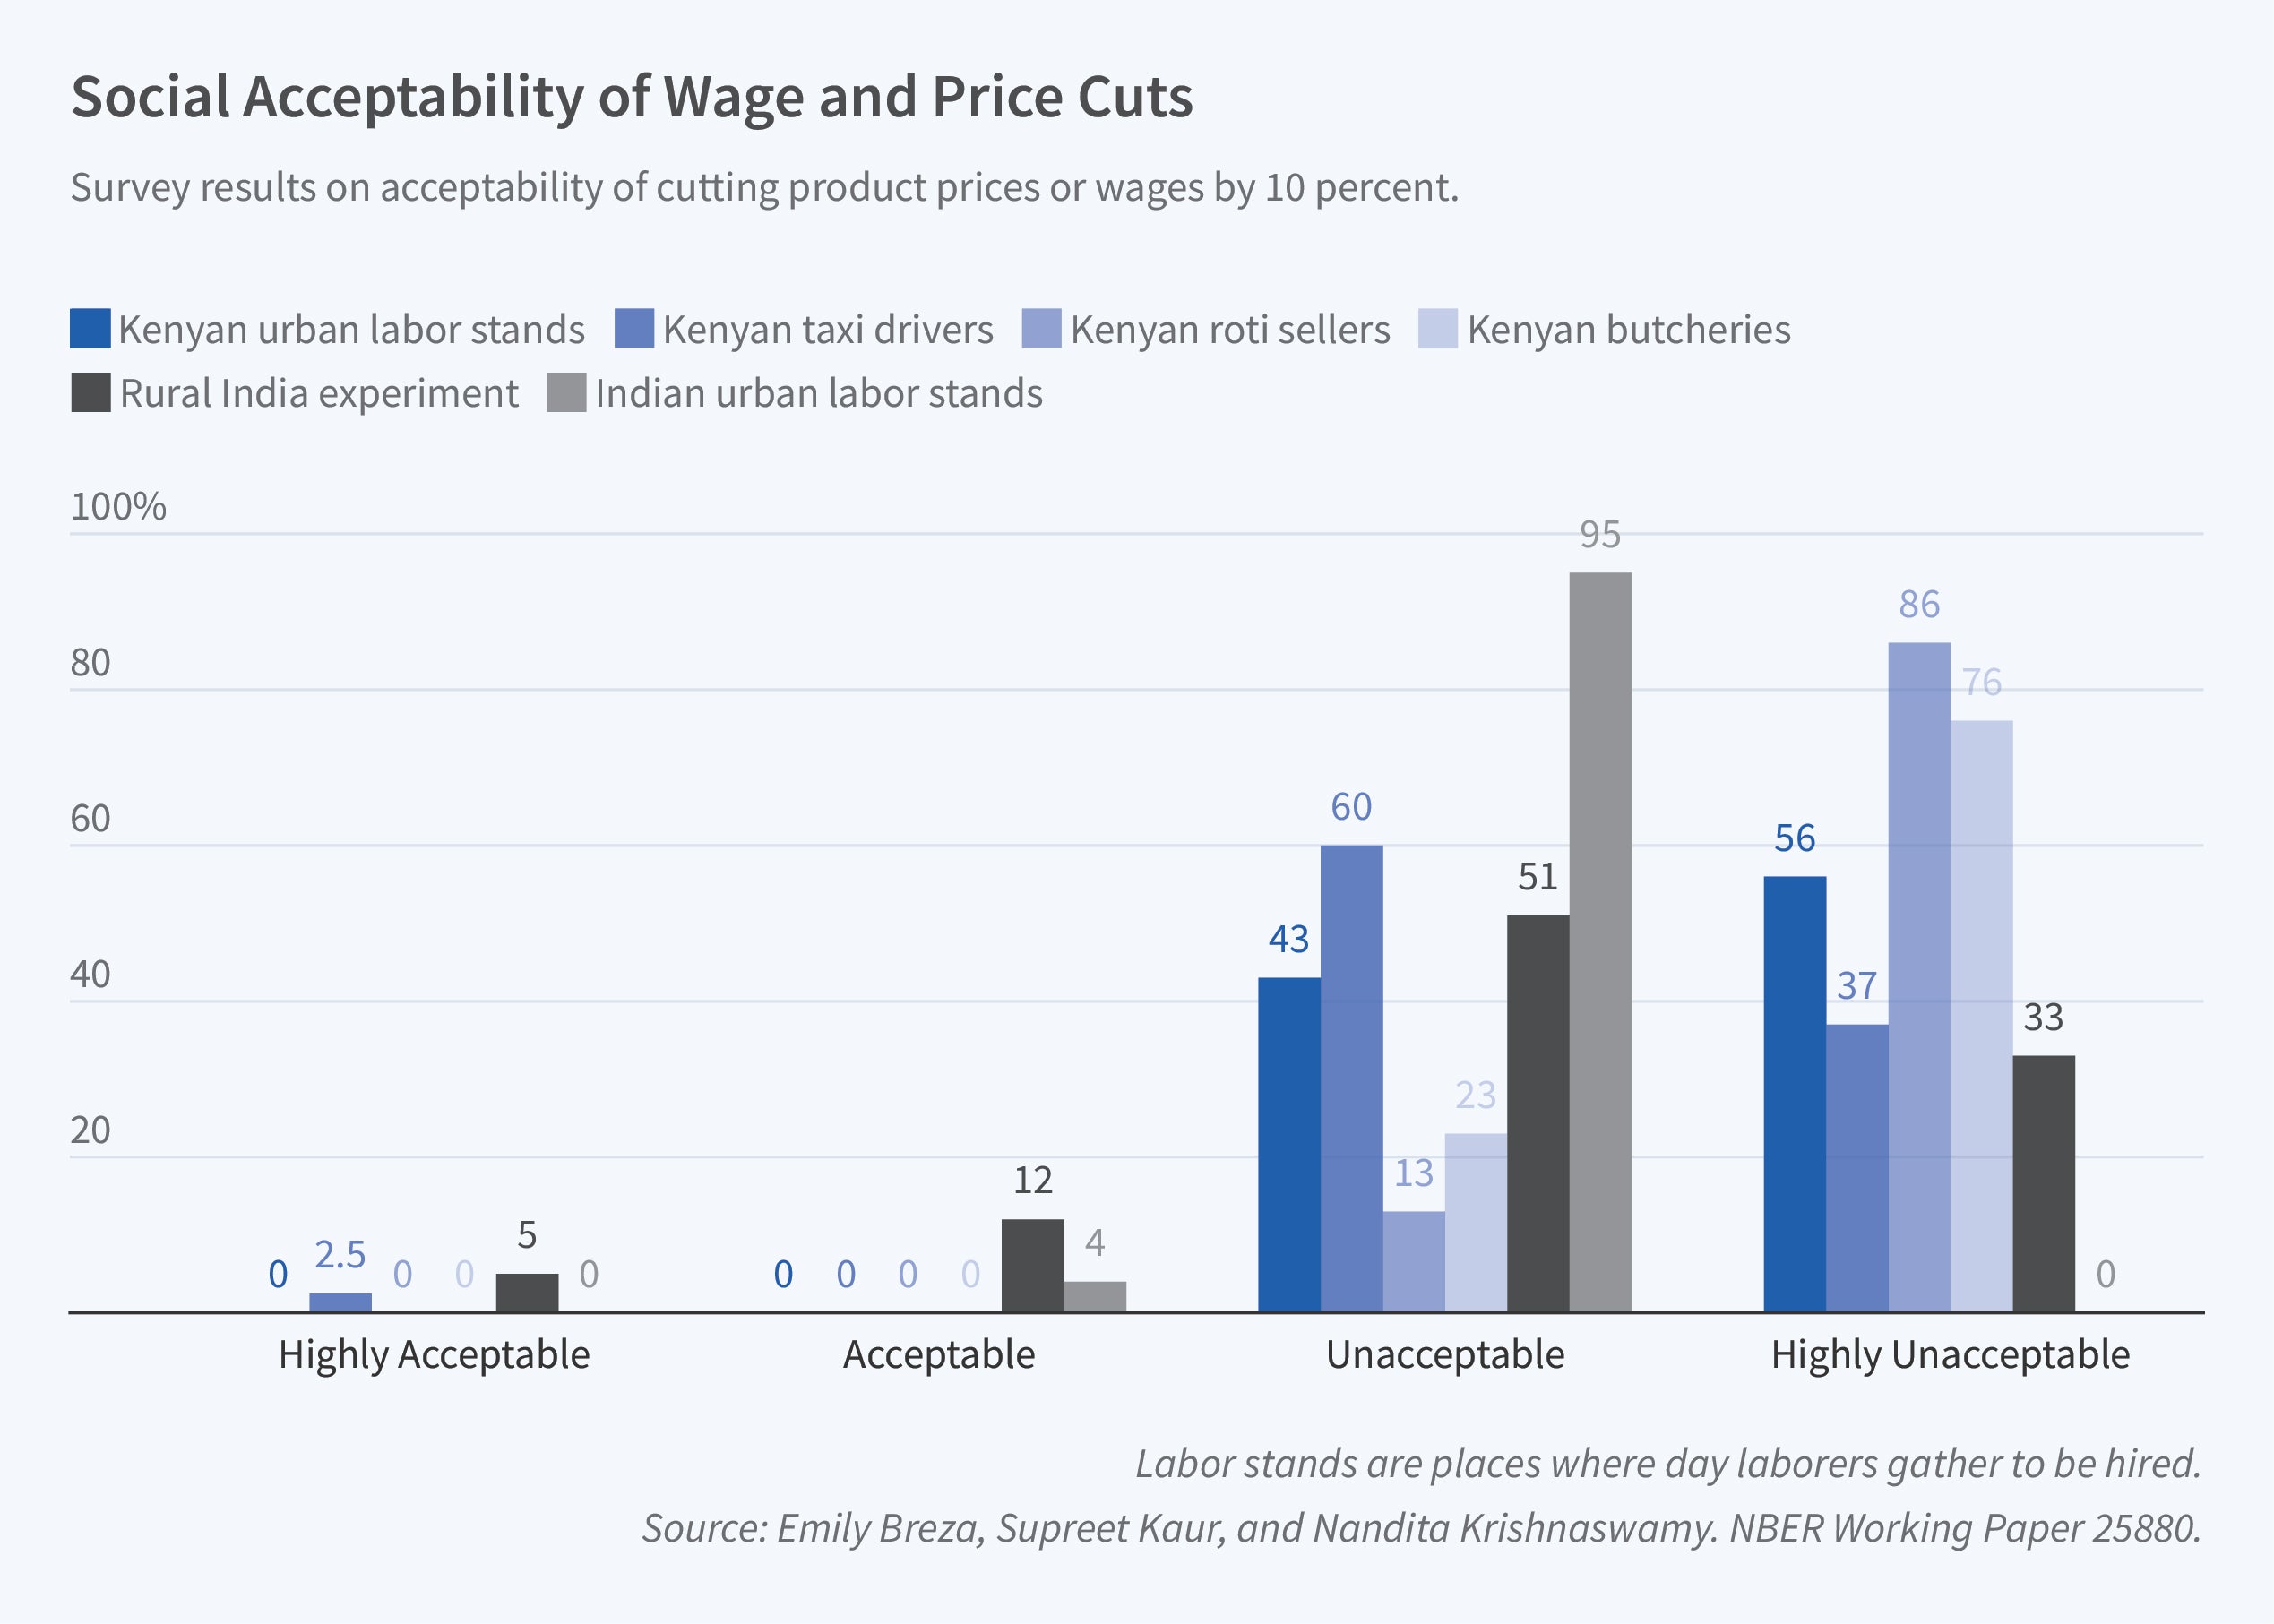 The figure is a bar graph titled, Social Acceptability of Wage and Price Cuts. It is subtitled, Survey results on acceptability of cutting product prices or wages by 10 percent. The bar graph displays survey results on the social acceptability of cutting product prices or wages by 10 percent for various groups in Kenya and India. The vertical axis represents the percentage of respondents, ranging from 0% to 100%. The horizontal axis shows four categories, representing the proportion of respondents who found the 10 percent cut "Highly Acceptable," "Acceptable," "Unacceptable," or "Highly Unacceptable." The categories are divided into the different groups surveyed, including Kenyan urban labor stands, Kenyan taxi drivers, Kenyan roti sellers, Kenyan butcheries, Indian urban labor stands, and a rural India experiment. For all groups except the rural India experiment, the percentage of respondents who found the cuts to be unacceptable or highly unacceptable exceeded 95 percent. For the Rural India experiment, the percentage was only 83 percent.  The note on the figure reads, labor stands are places where day laborers gather to be hired. The source line reads, Source: Emily Breza, Supreet Kaur, and Nandita Krishnaswamy. NBER Working Paper 25880.